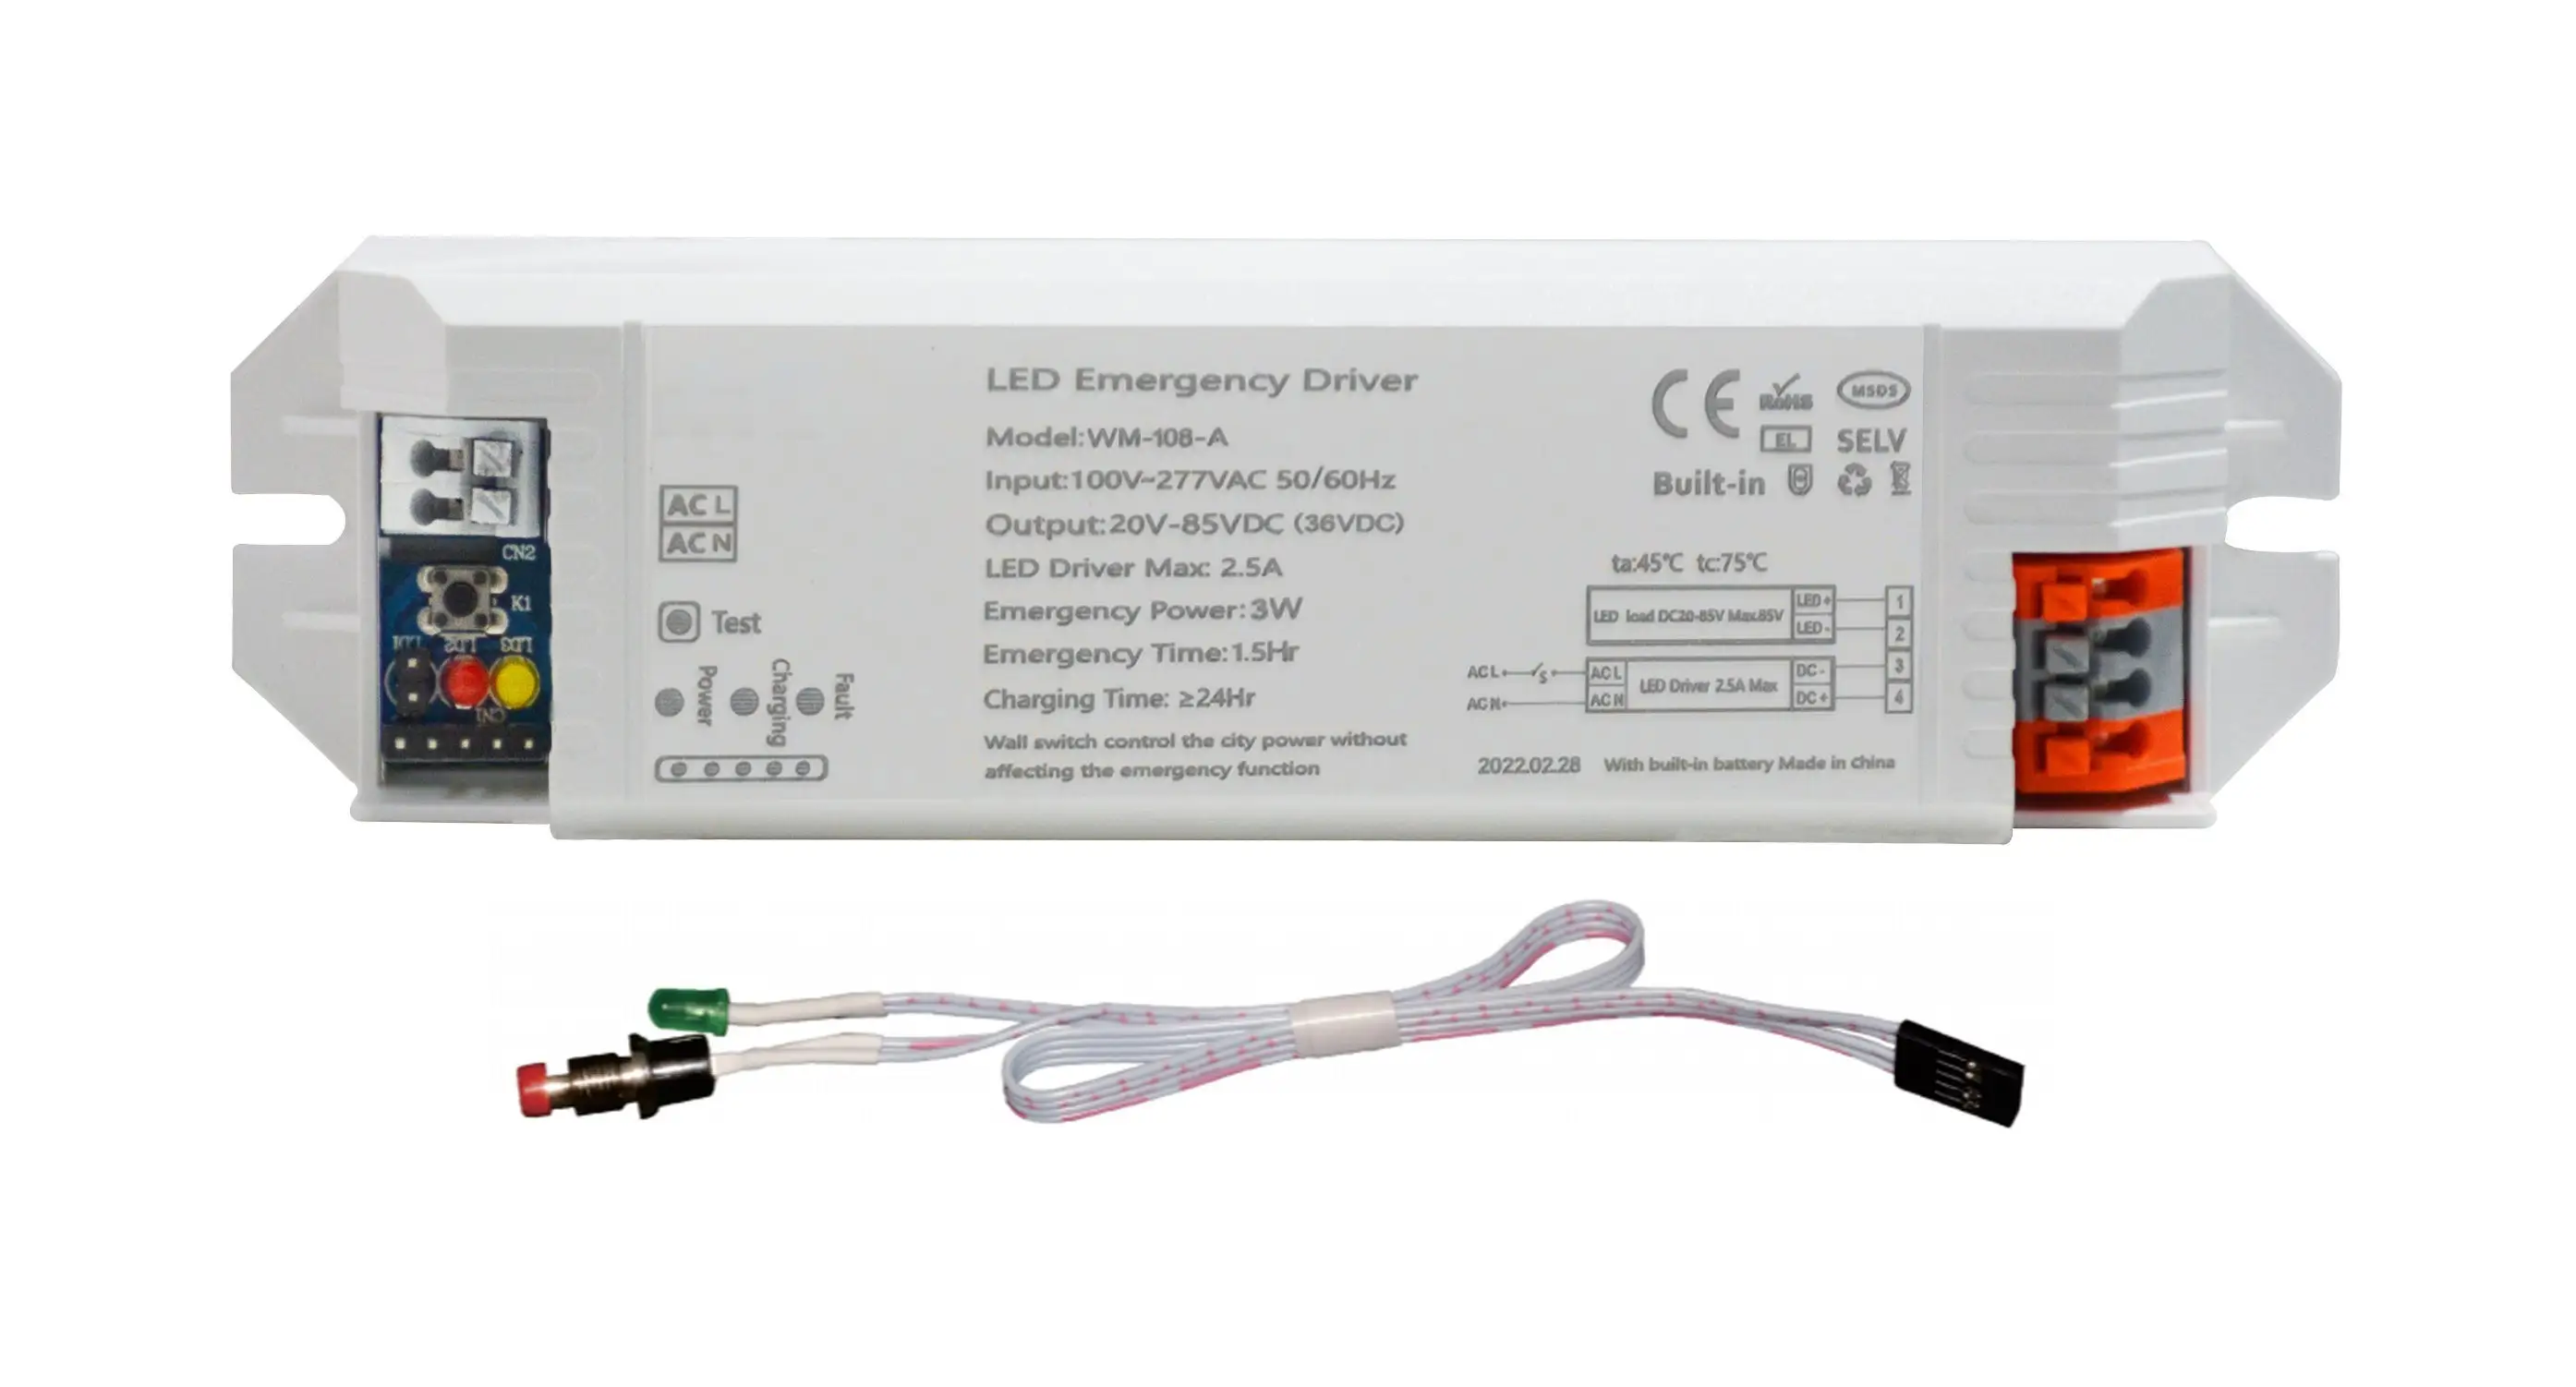 LED Emergency Driver Rechargeable Battery Pack For LED Lamp Max. 50W